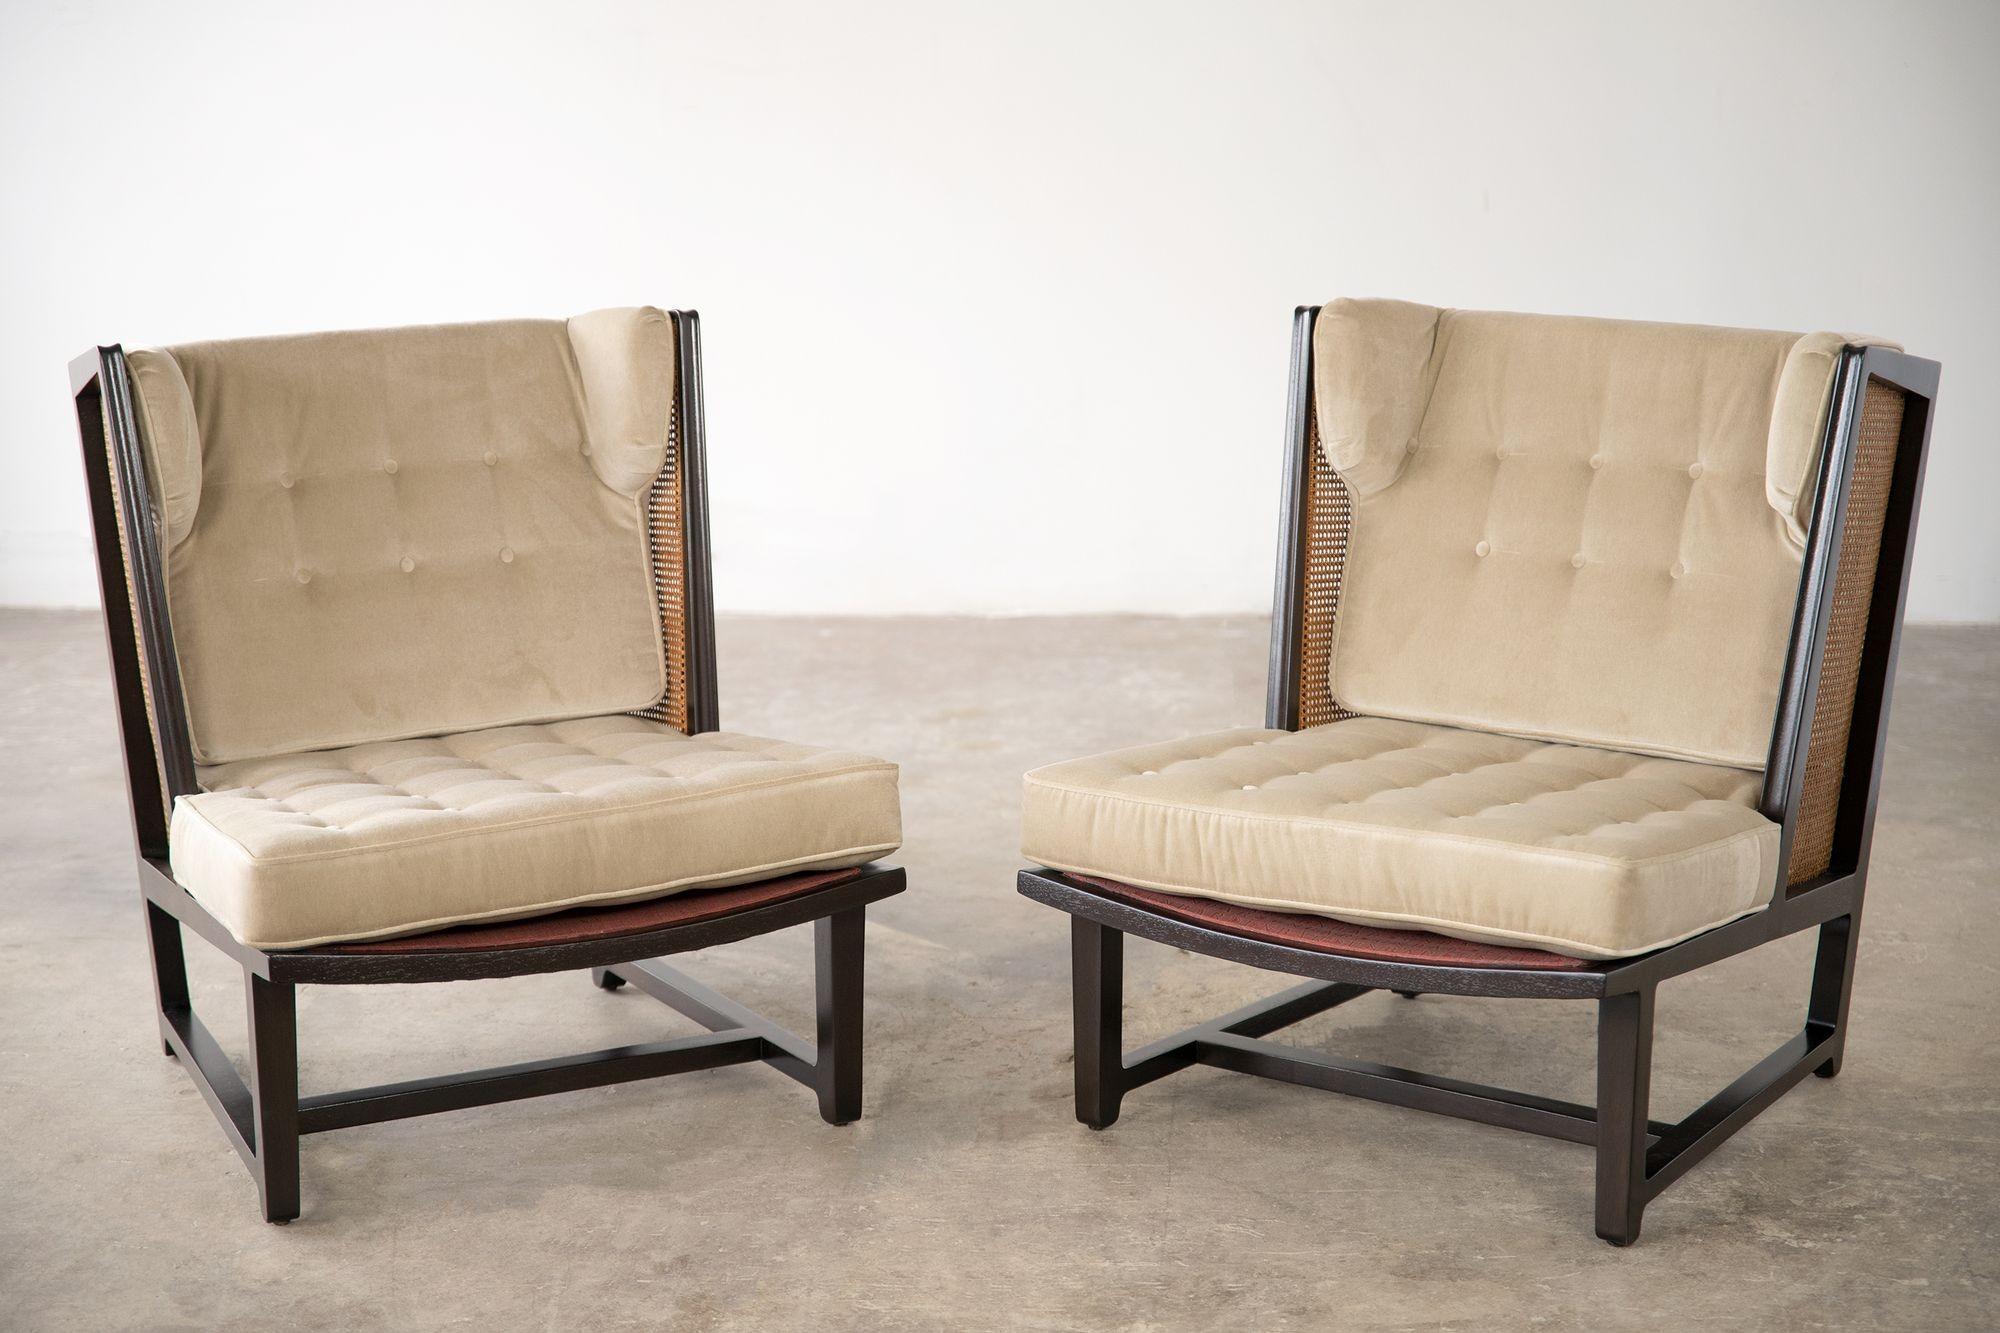 Mid-Century Modern Edward Wormley Wing Lounge Chairs for Dunbar Model 6016 Pair in Cane & Mahogany